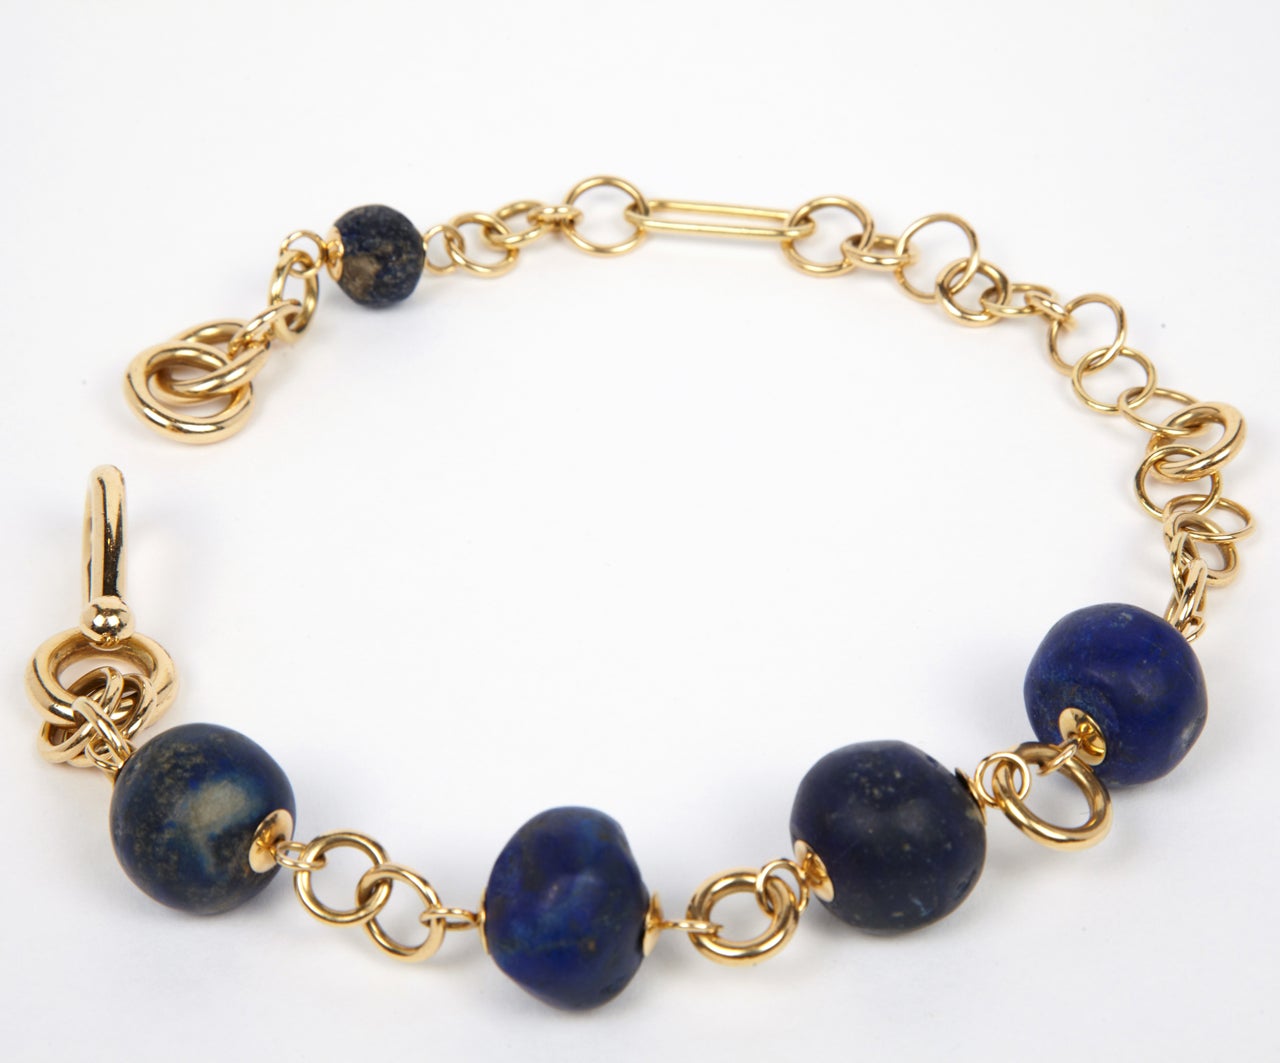 Necklace with various sizes of 18K gold links, with original slide-in clasp, centering four large lapis lazuli beads dating from the 2nd millennium B.C. & a smaller matching bead. 
Necklace length is 15.7 inches, largest bead is 0.8 inch in